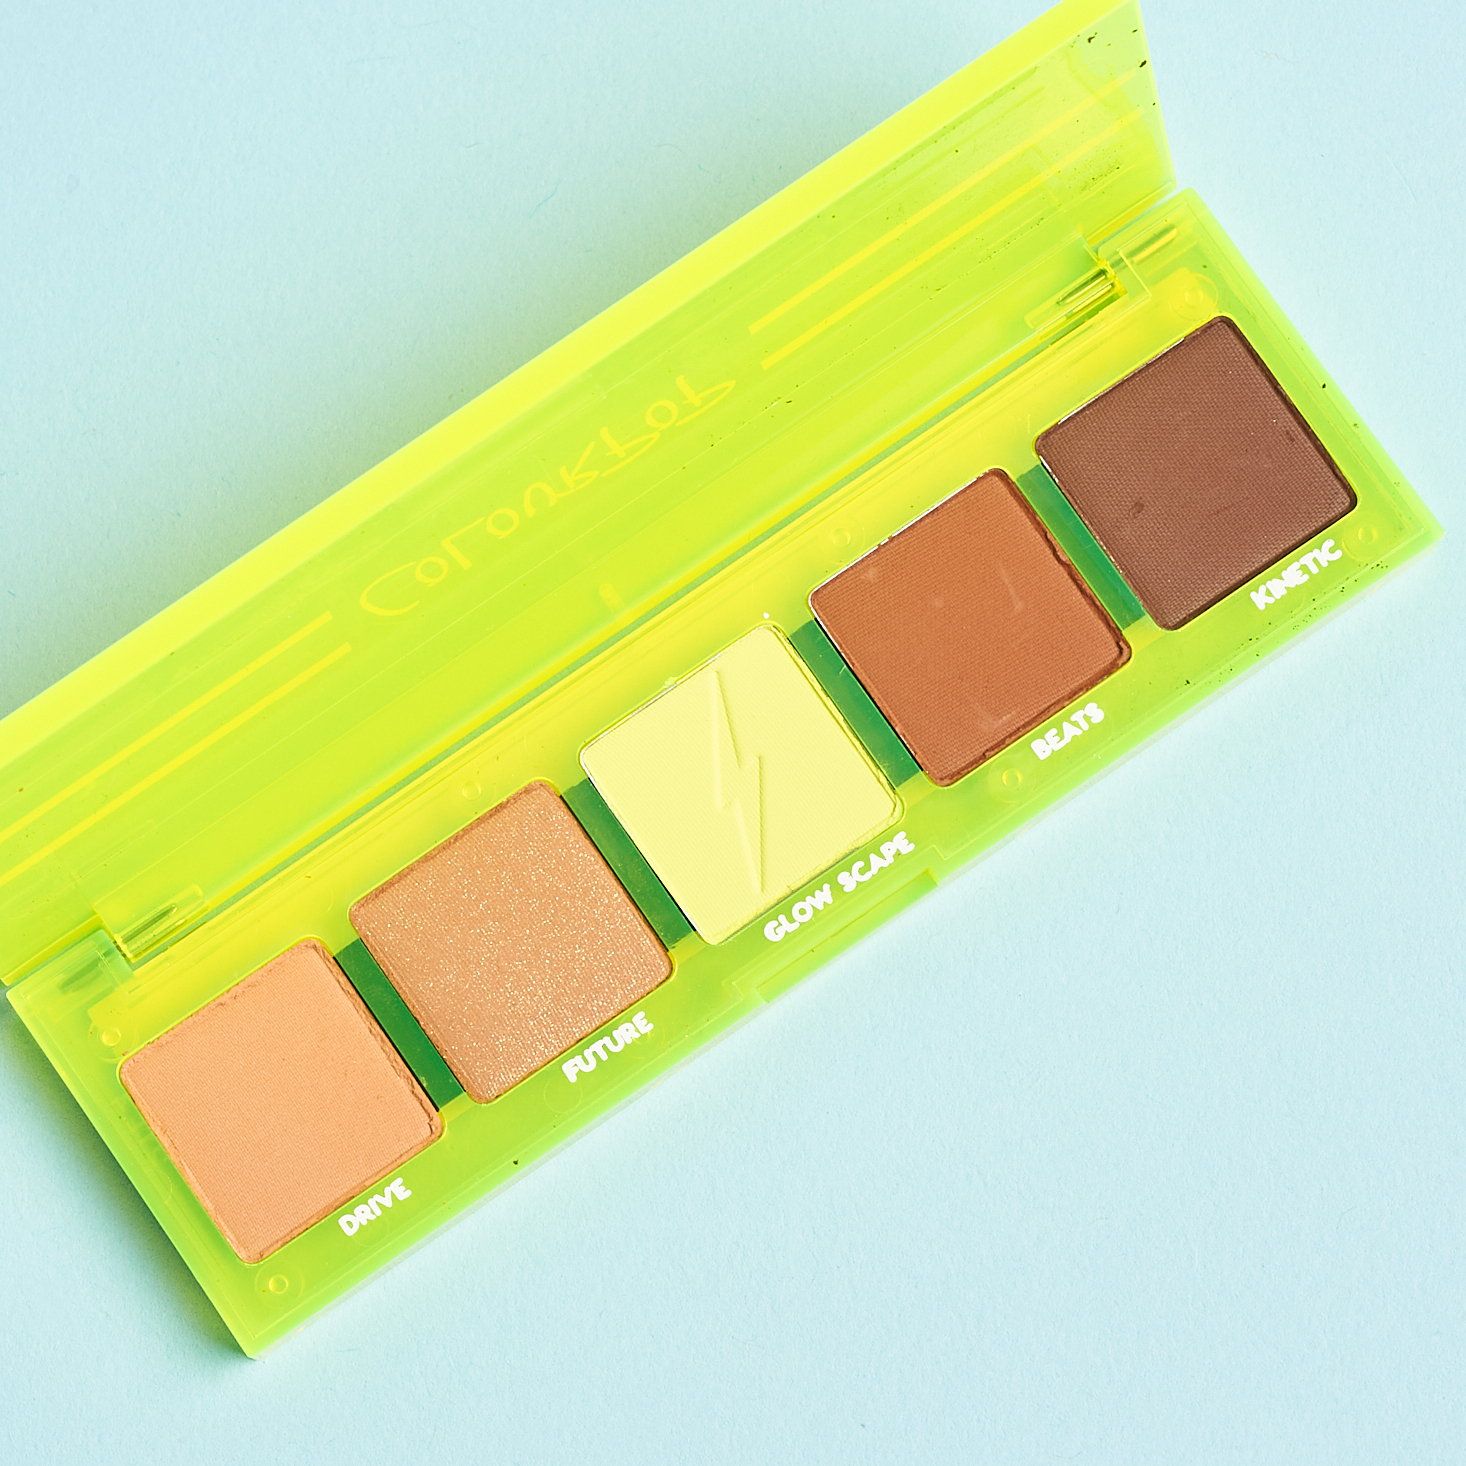 opened neon yellow plastic eyeshadow palette showing four brown shades and a neon yellow shade